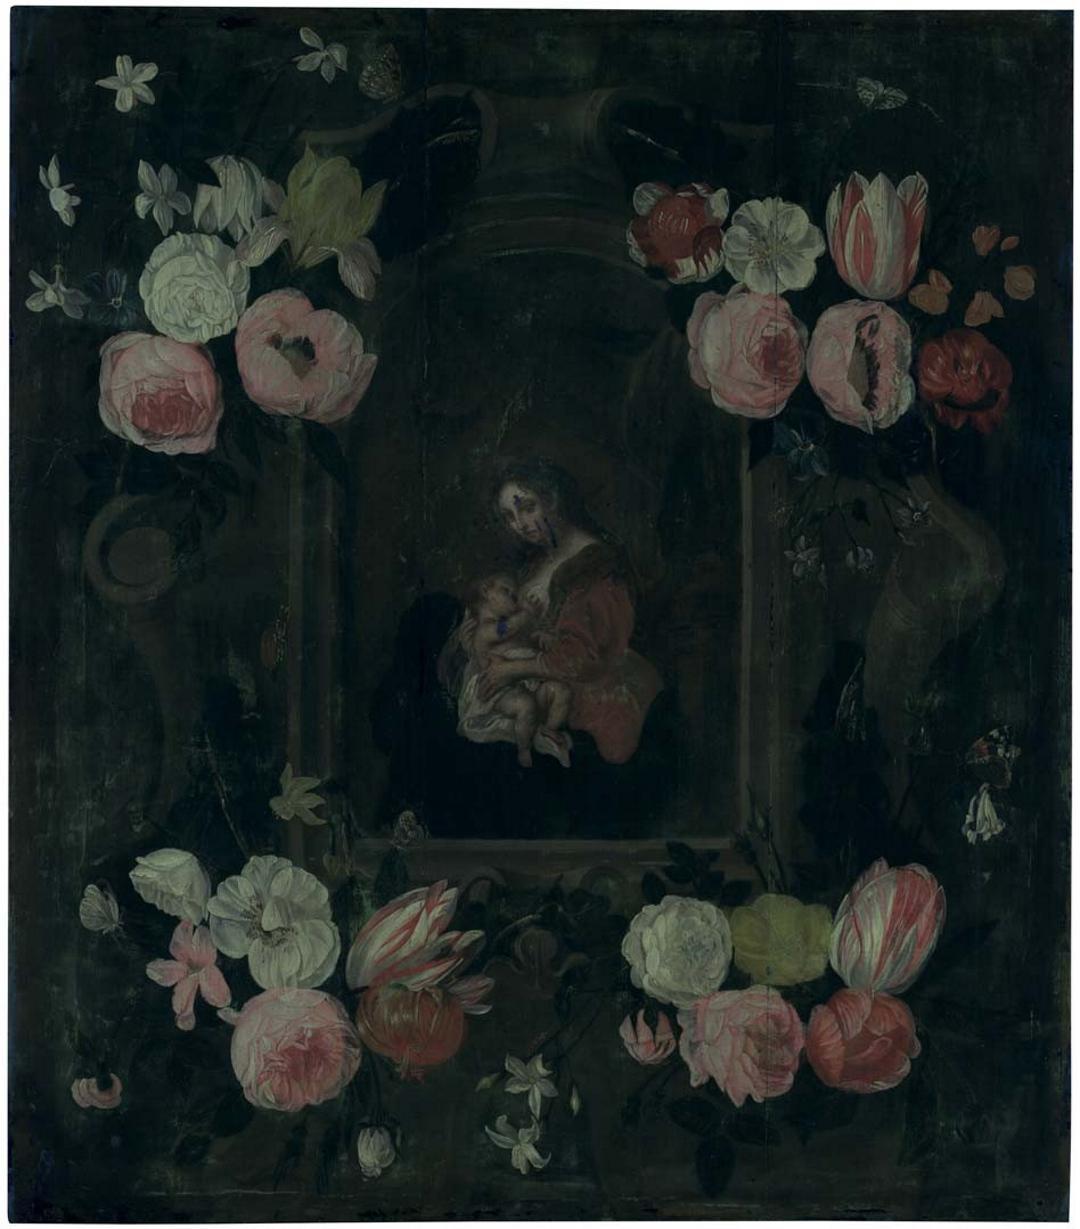 Slider: UV, Madonna and Child encircled by roses c.1650s